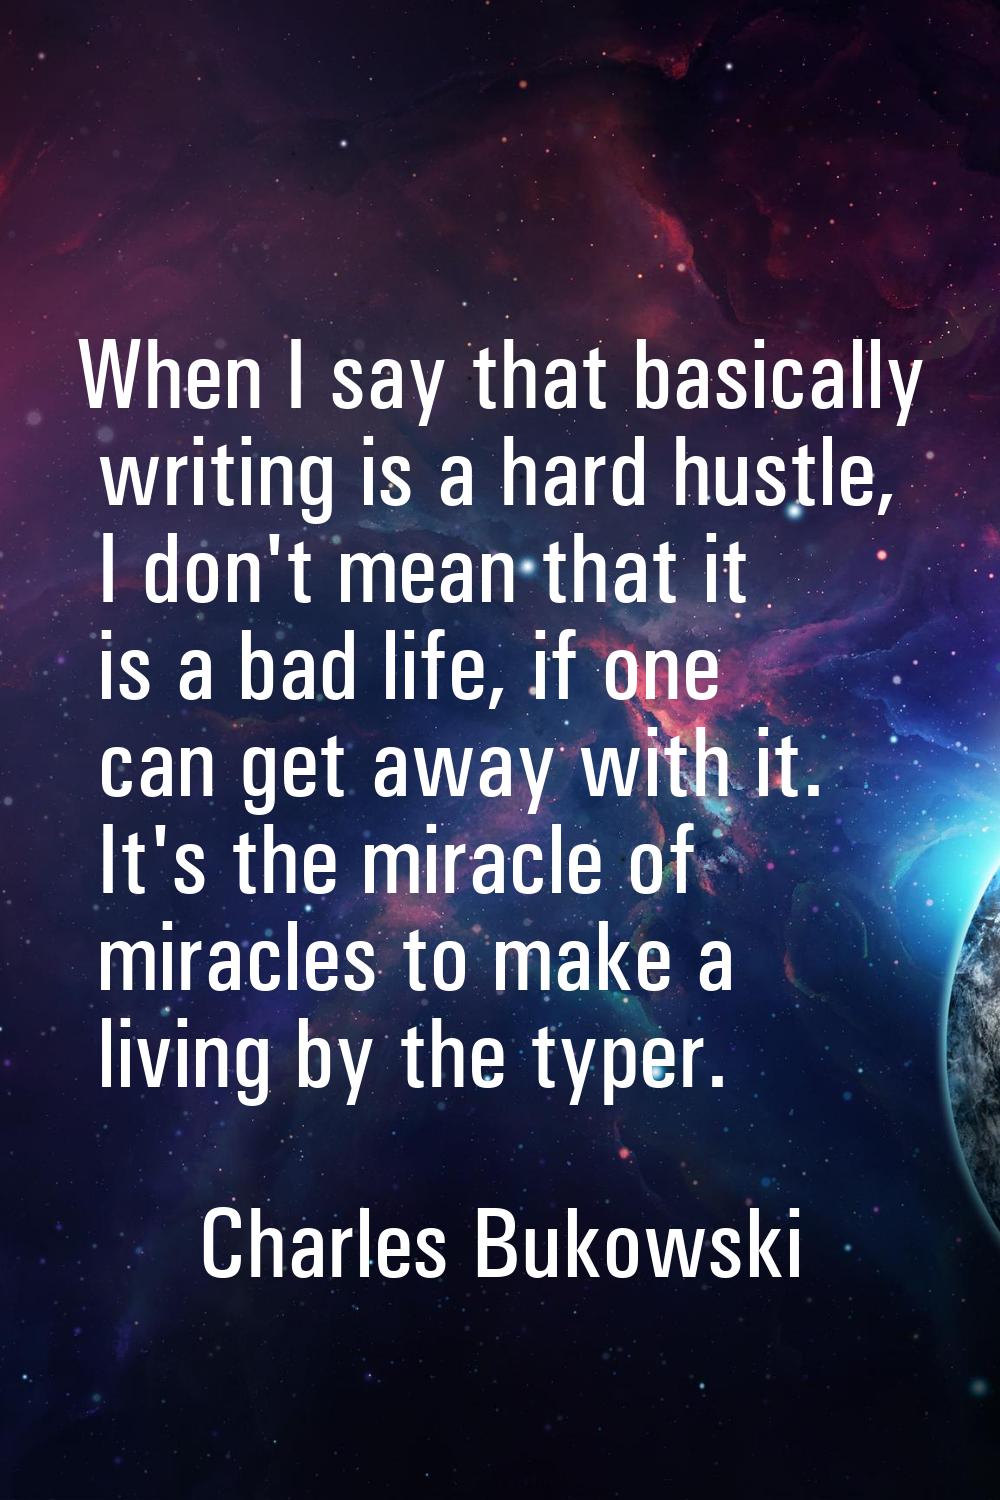 When I say that basically writing is a hard hustle, I don't mean that it is a bad life, if one can 